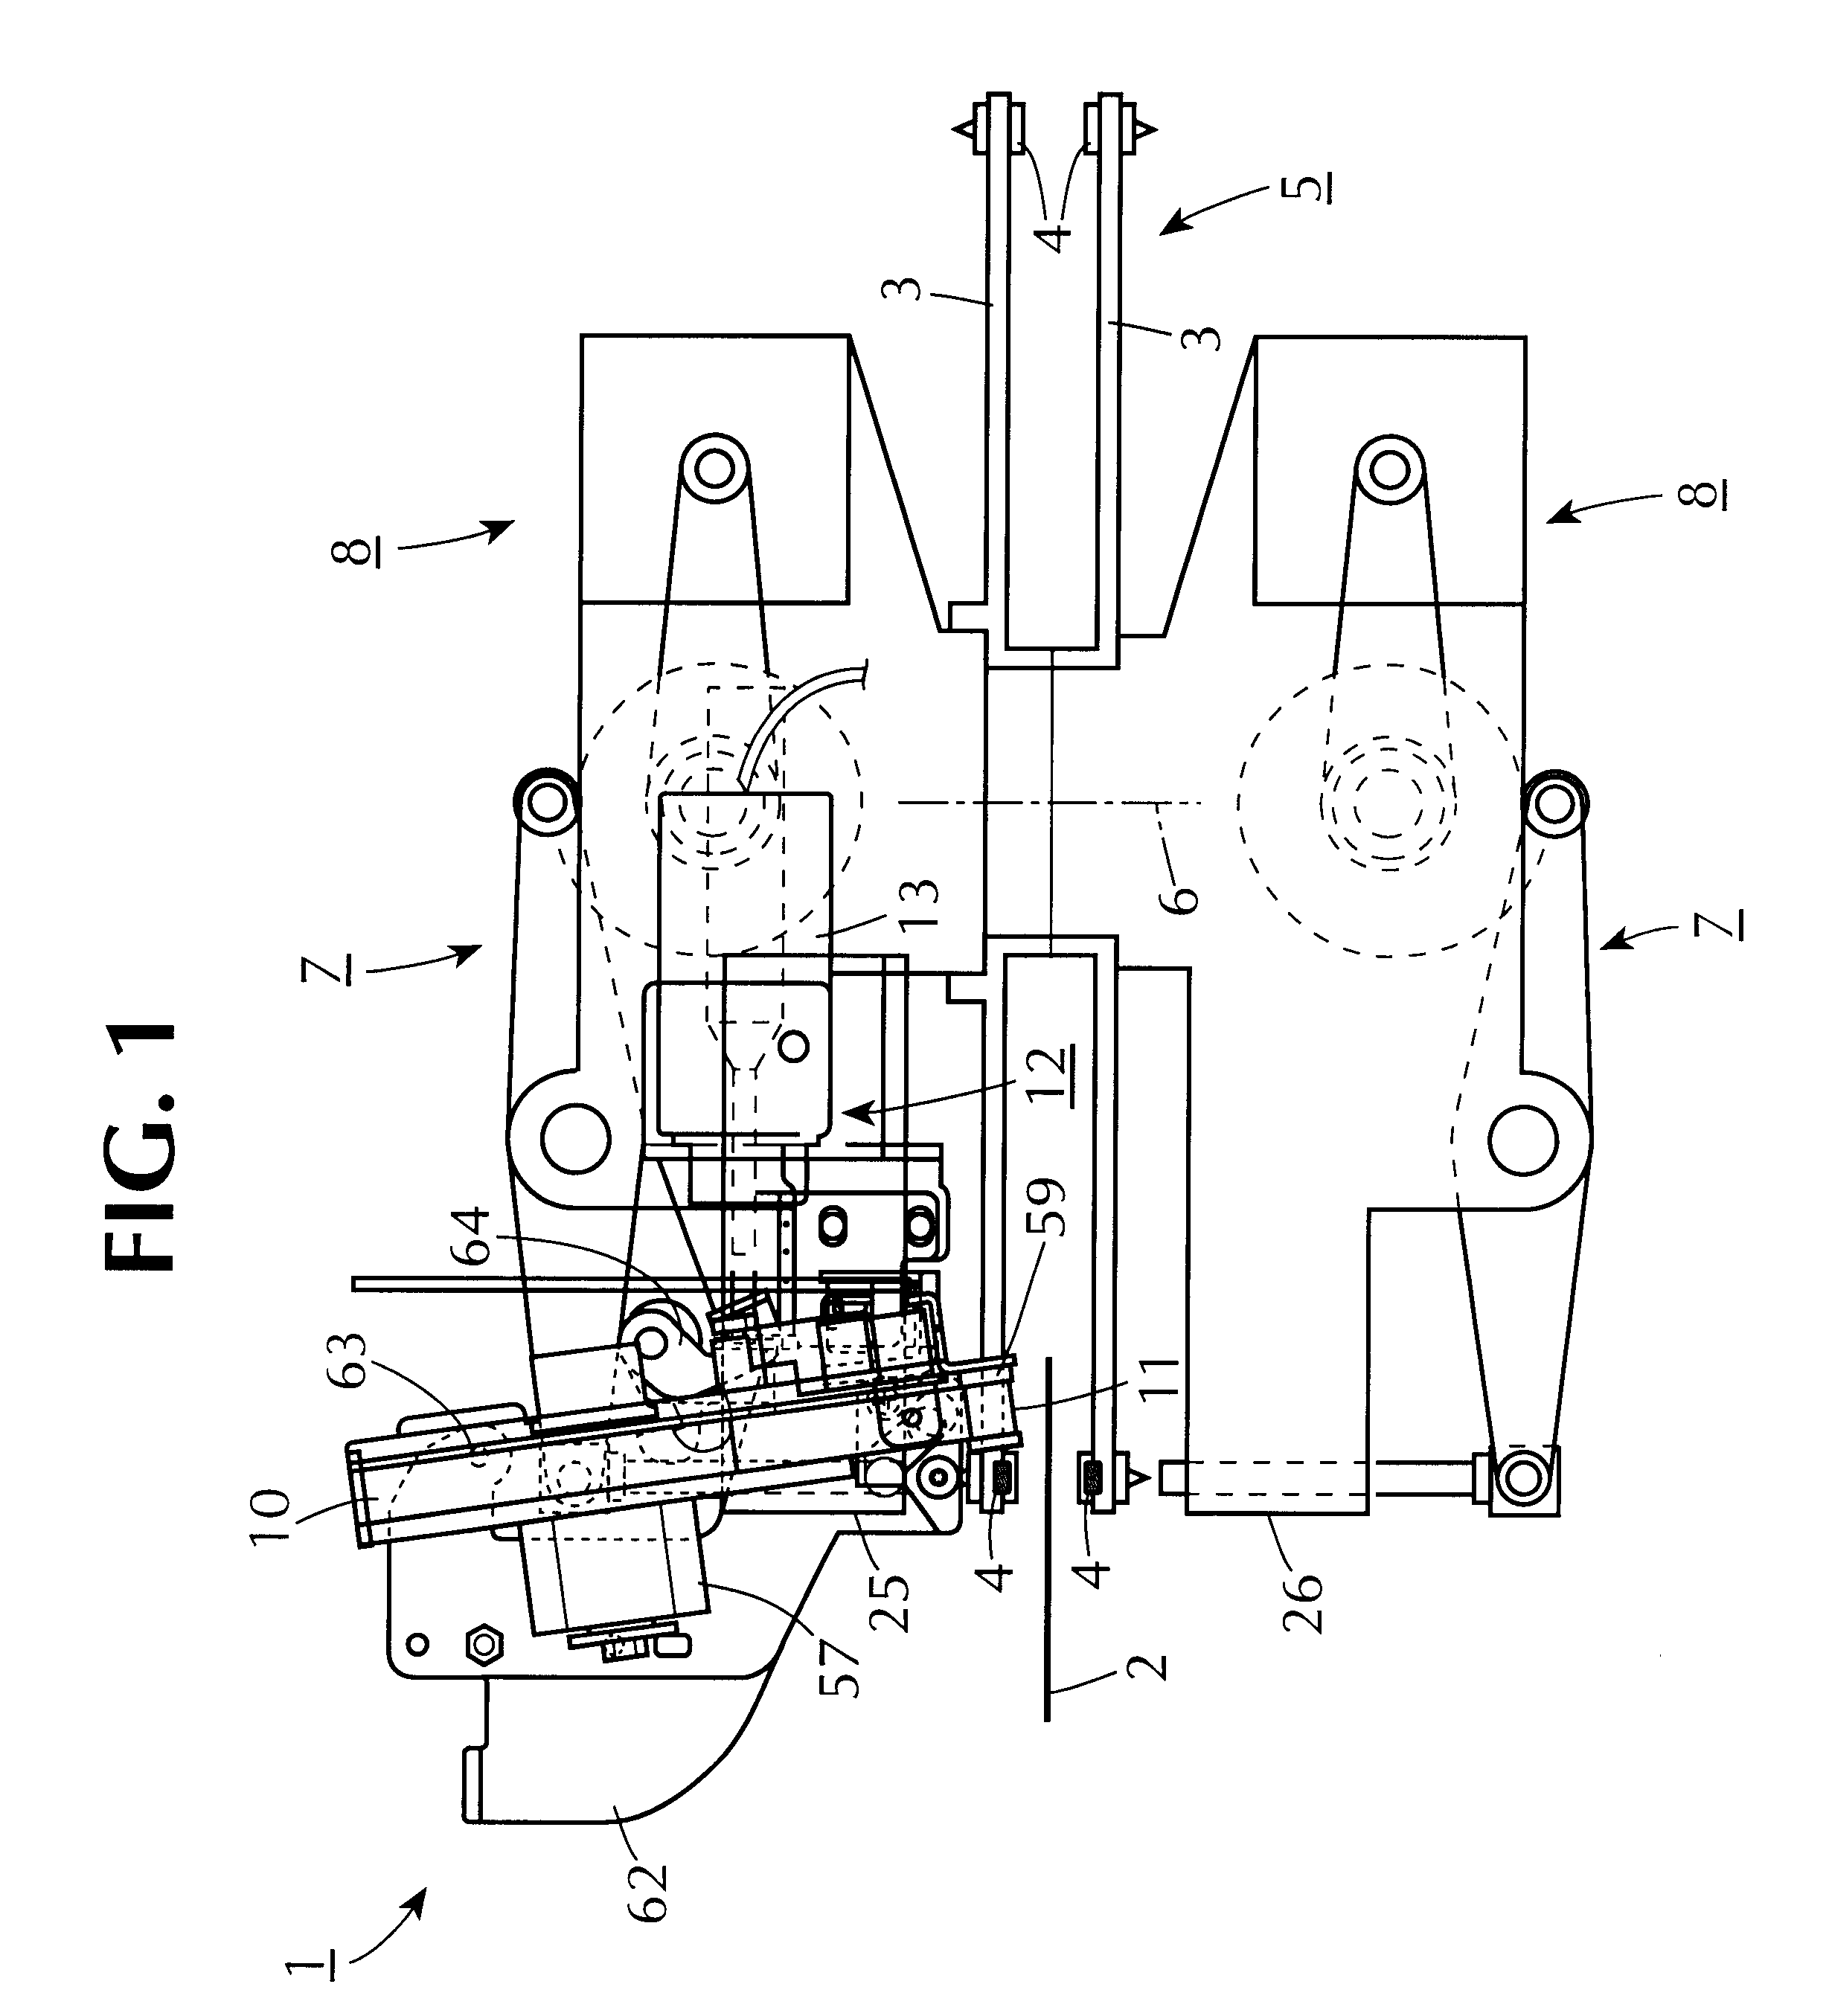 Marking press device for producing raised symbols with or without coloring